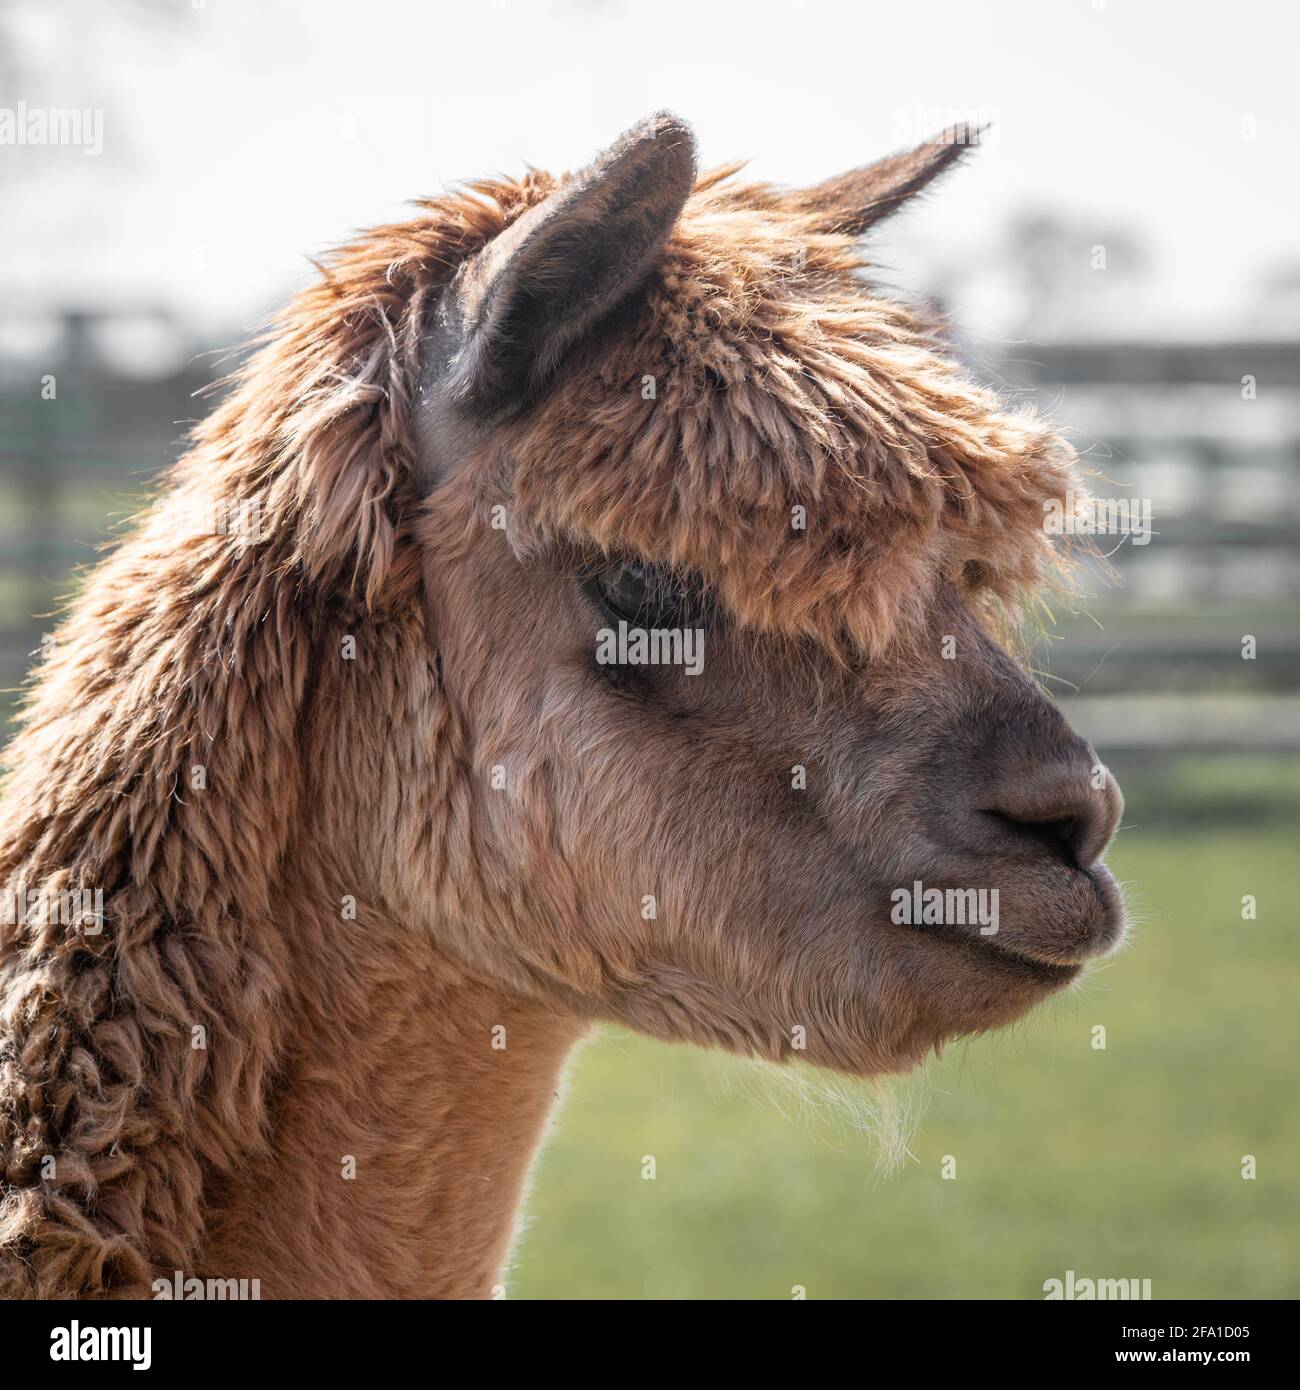 A very close profile portrait of the head and side face of a brown alpaca, Vicugna pacos. It is looking to the right and slightly down. Stock Photo